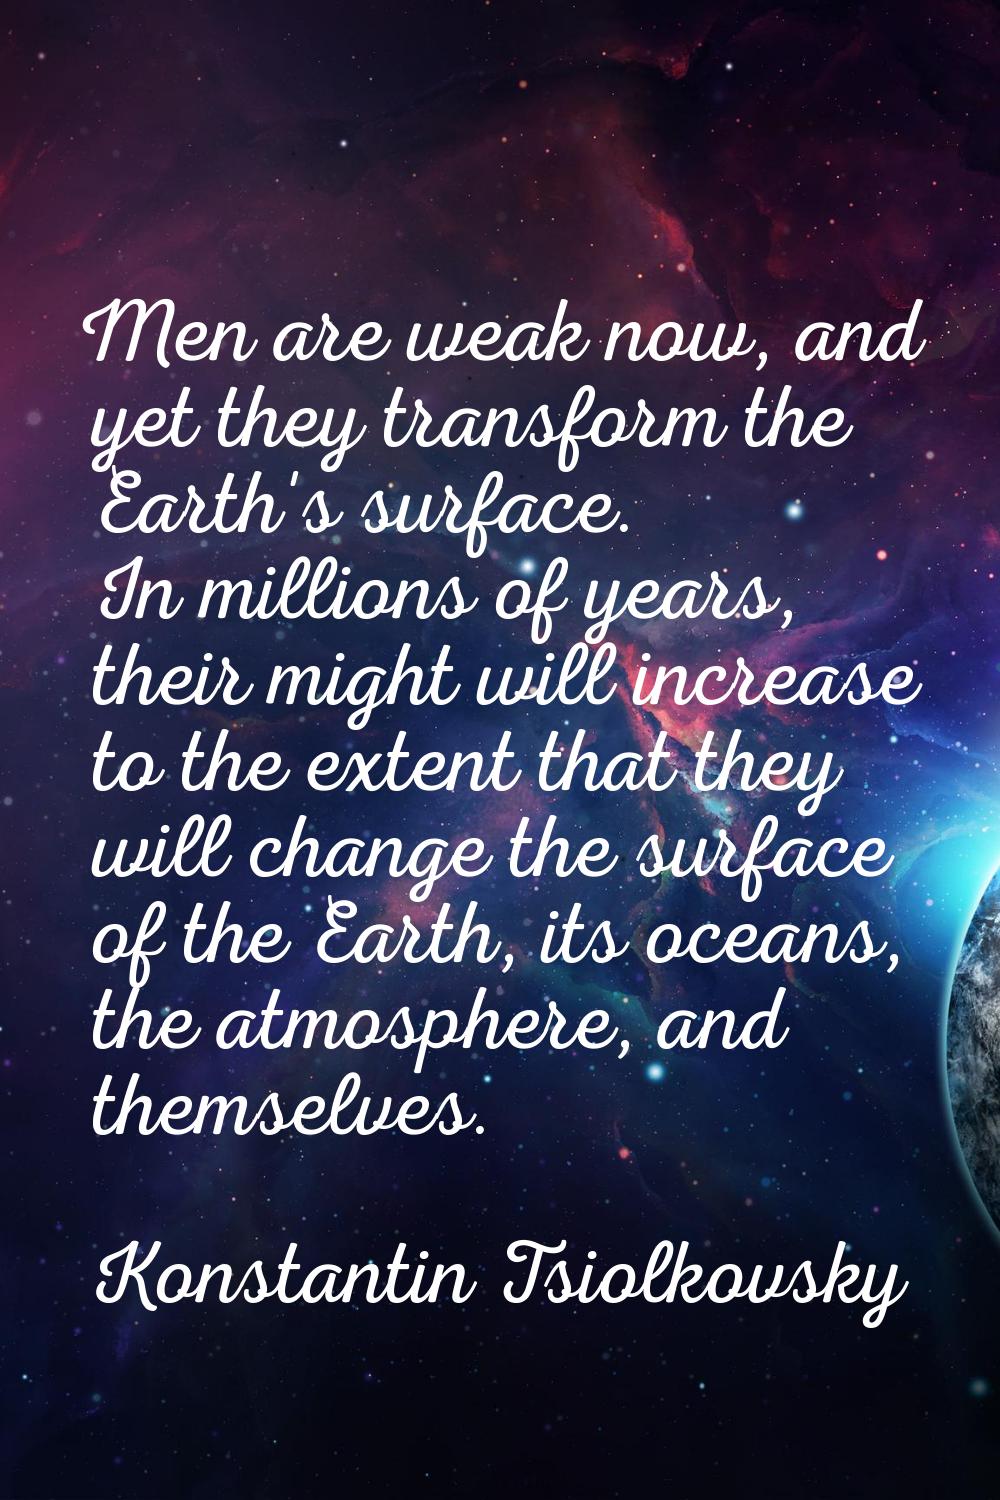 Men are weak now, and yet they transform the Earth's surface. In millions of years, their might wil